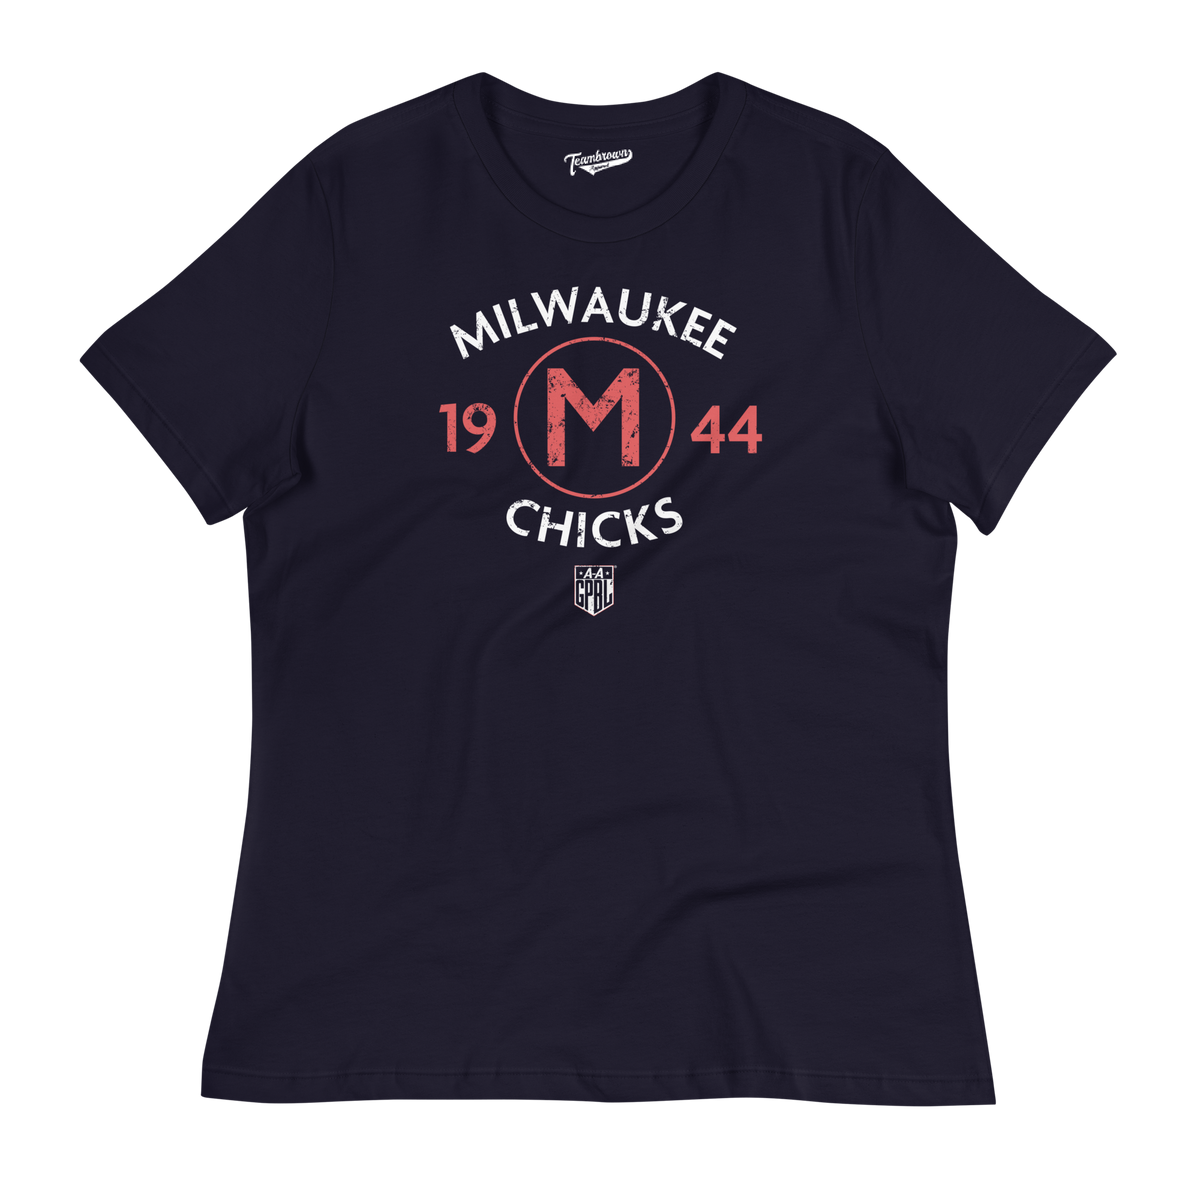 Milwaukee Chicks Champions - Women's Relaxed Fit T-Shirt | Officially Licensed - AAGPBL